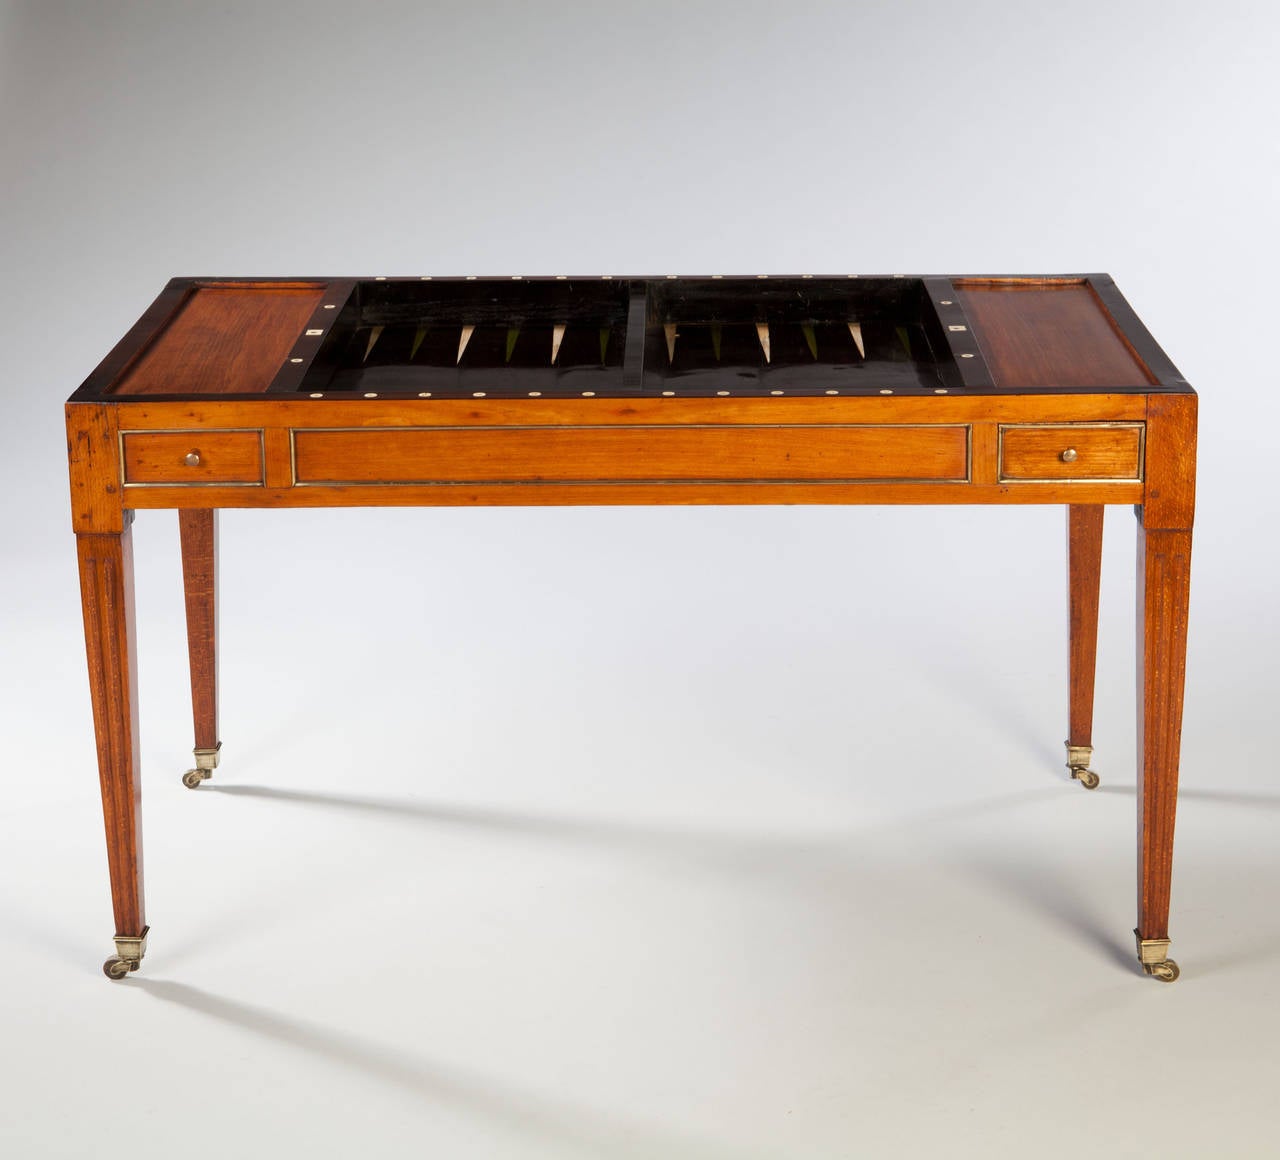 A Louis XVI period tric trac or games table. The removable leather lined writing surface having reversible baize lined playing surface, over ebony lined and ivory and rosewood inlaid backgammon well. The table is raised on square tapering legs